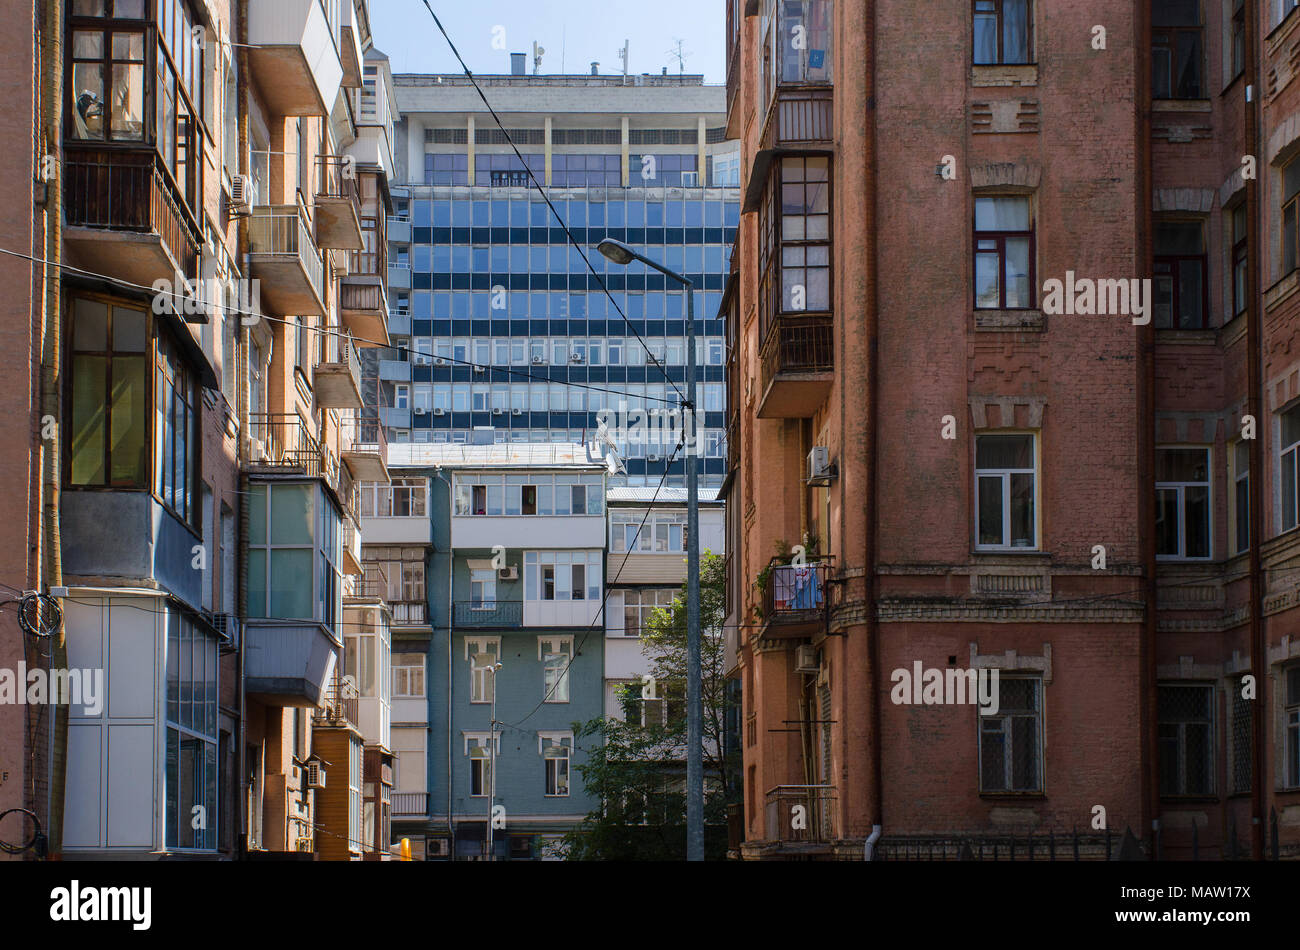 perspectives in Kiev, capital city of Ukraine, with a multitude of architectural styles meeting in urban scenery Stock Photo